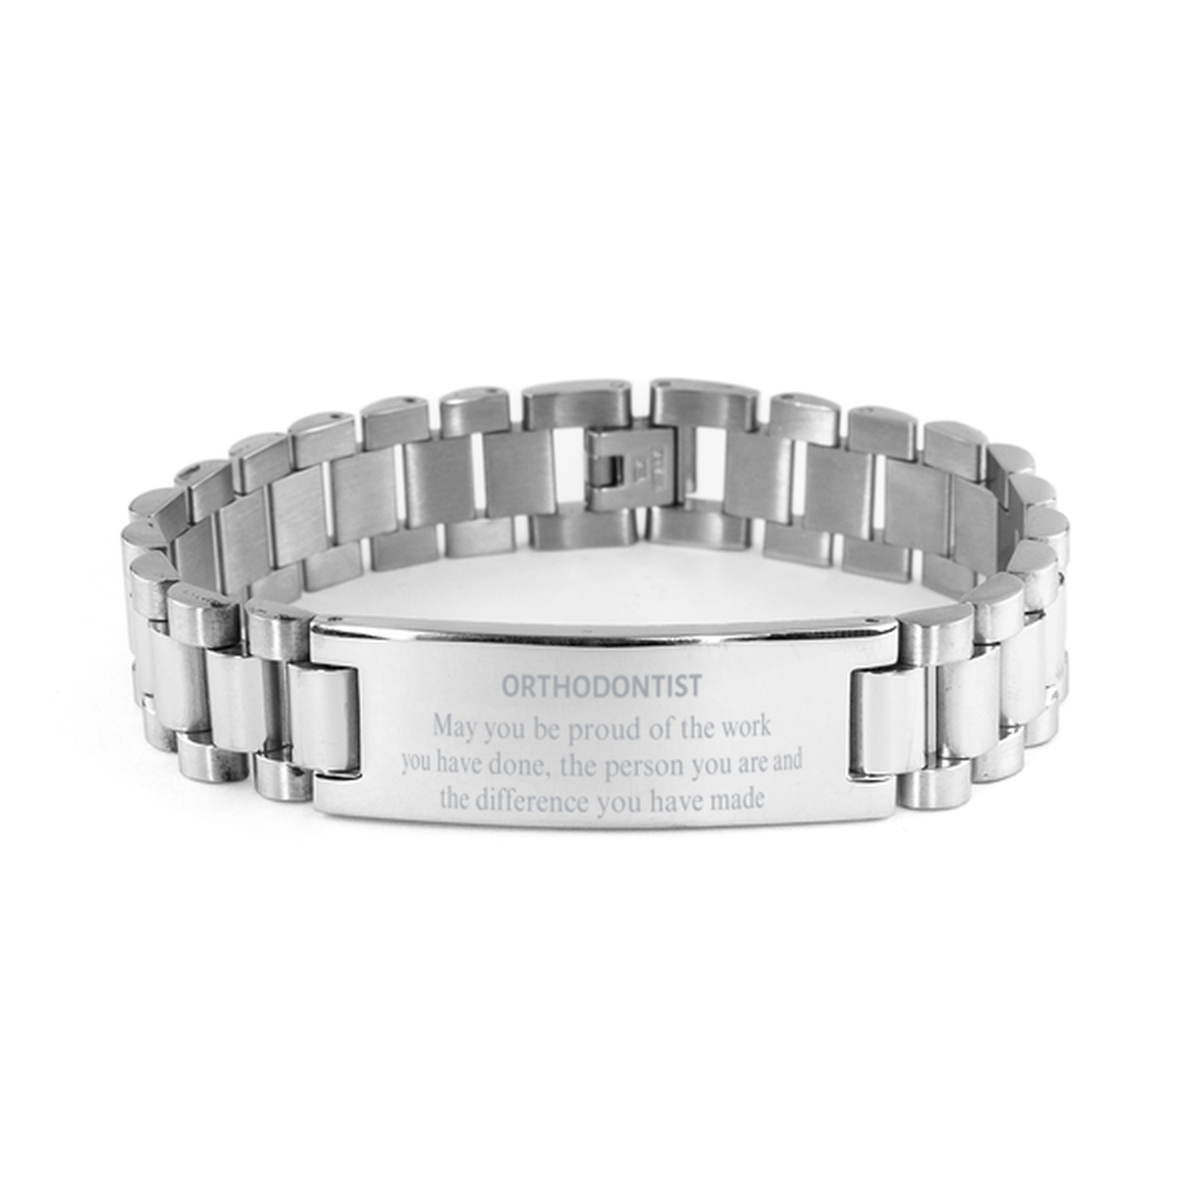 Orthodontist May you be proud of the work you have done, Retirement Orthodontist Ladder Stainless Steel Bracelet for Colleague Appreciation Gifts Amazing for Orthodontist